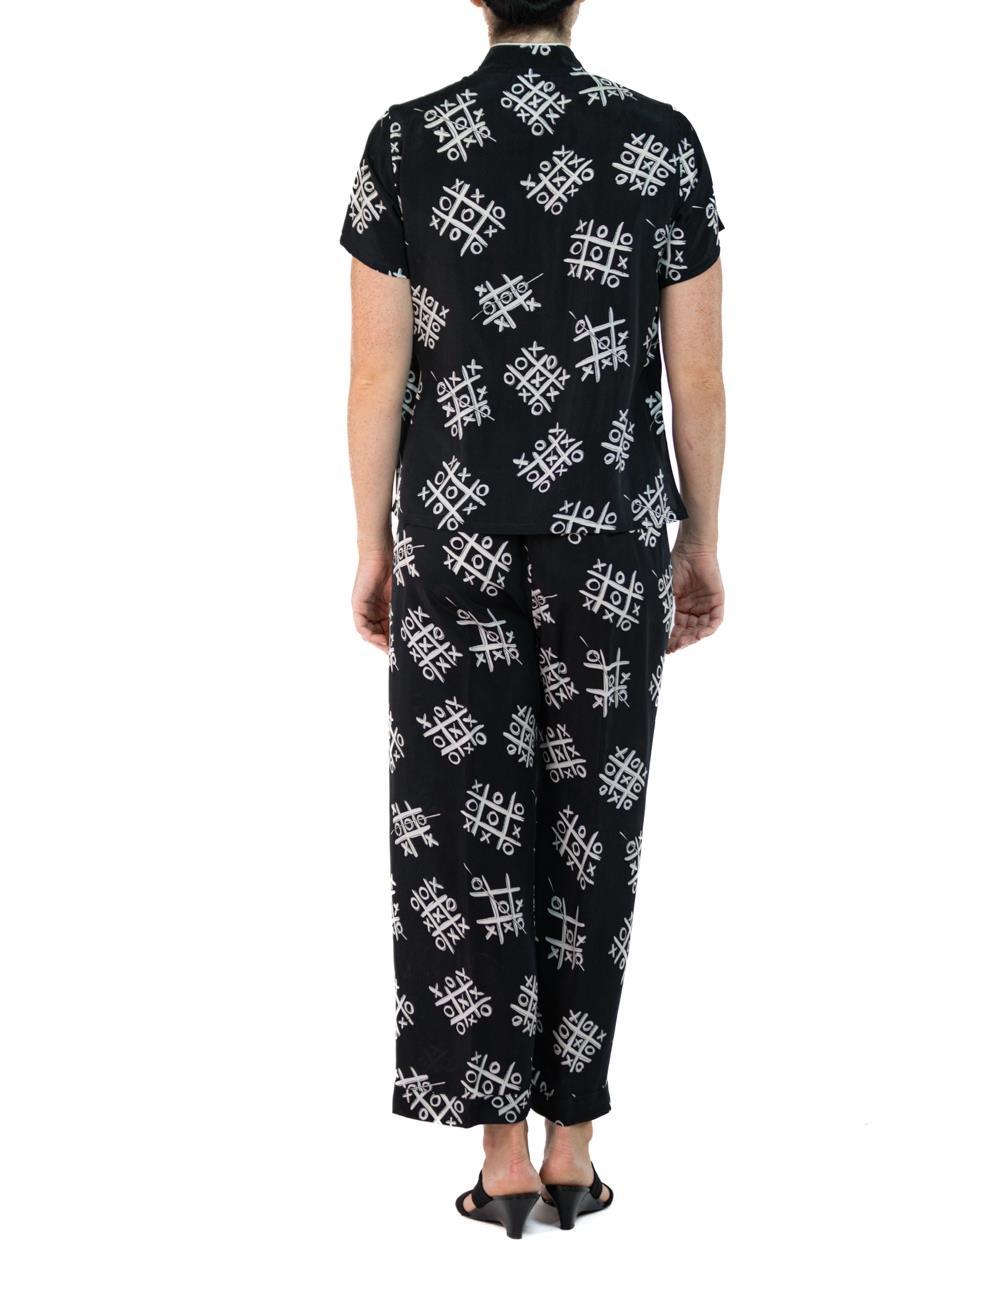 Morphew Collection Black & White Tic Tac Toe Novelty Print Cold Rayon Bias Paja For Sale 1